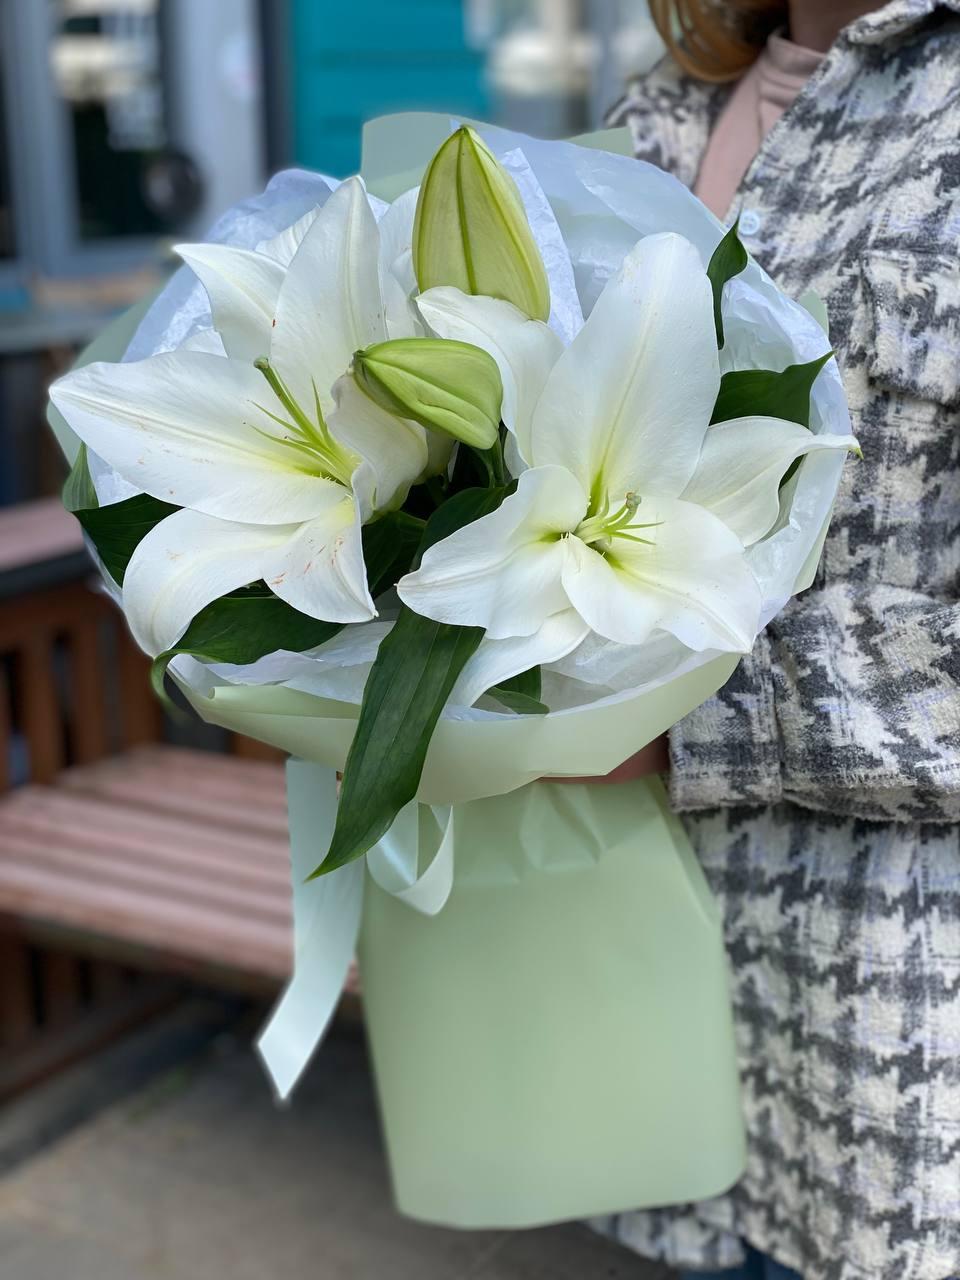 Bouquet of lilies "Fragrant wine"